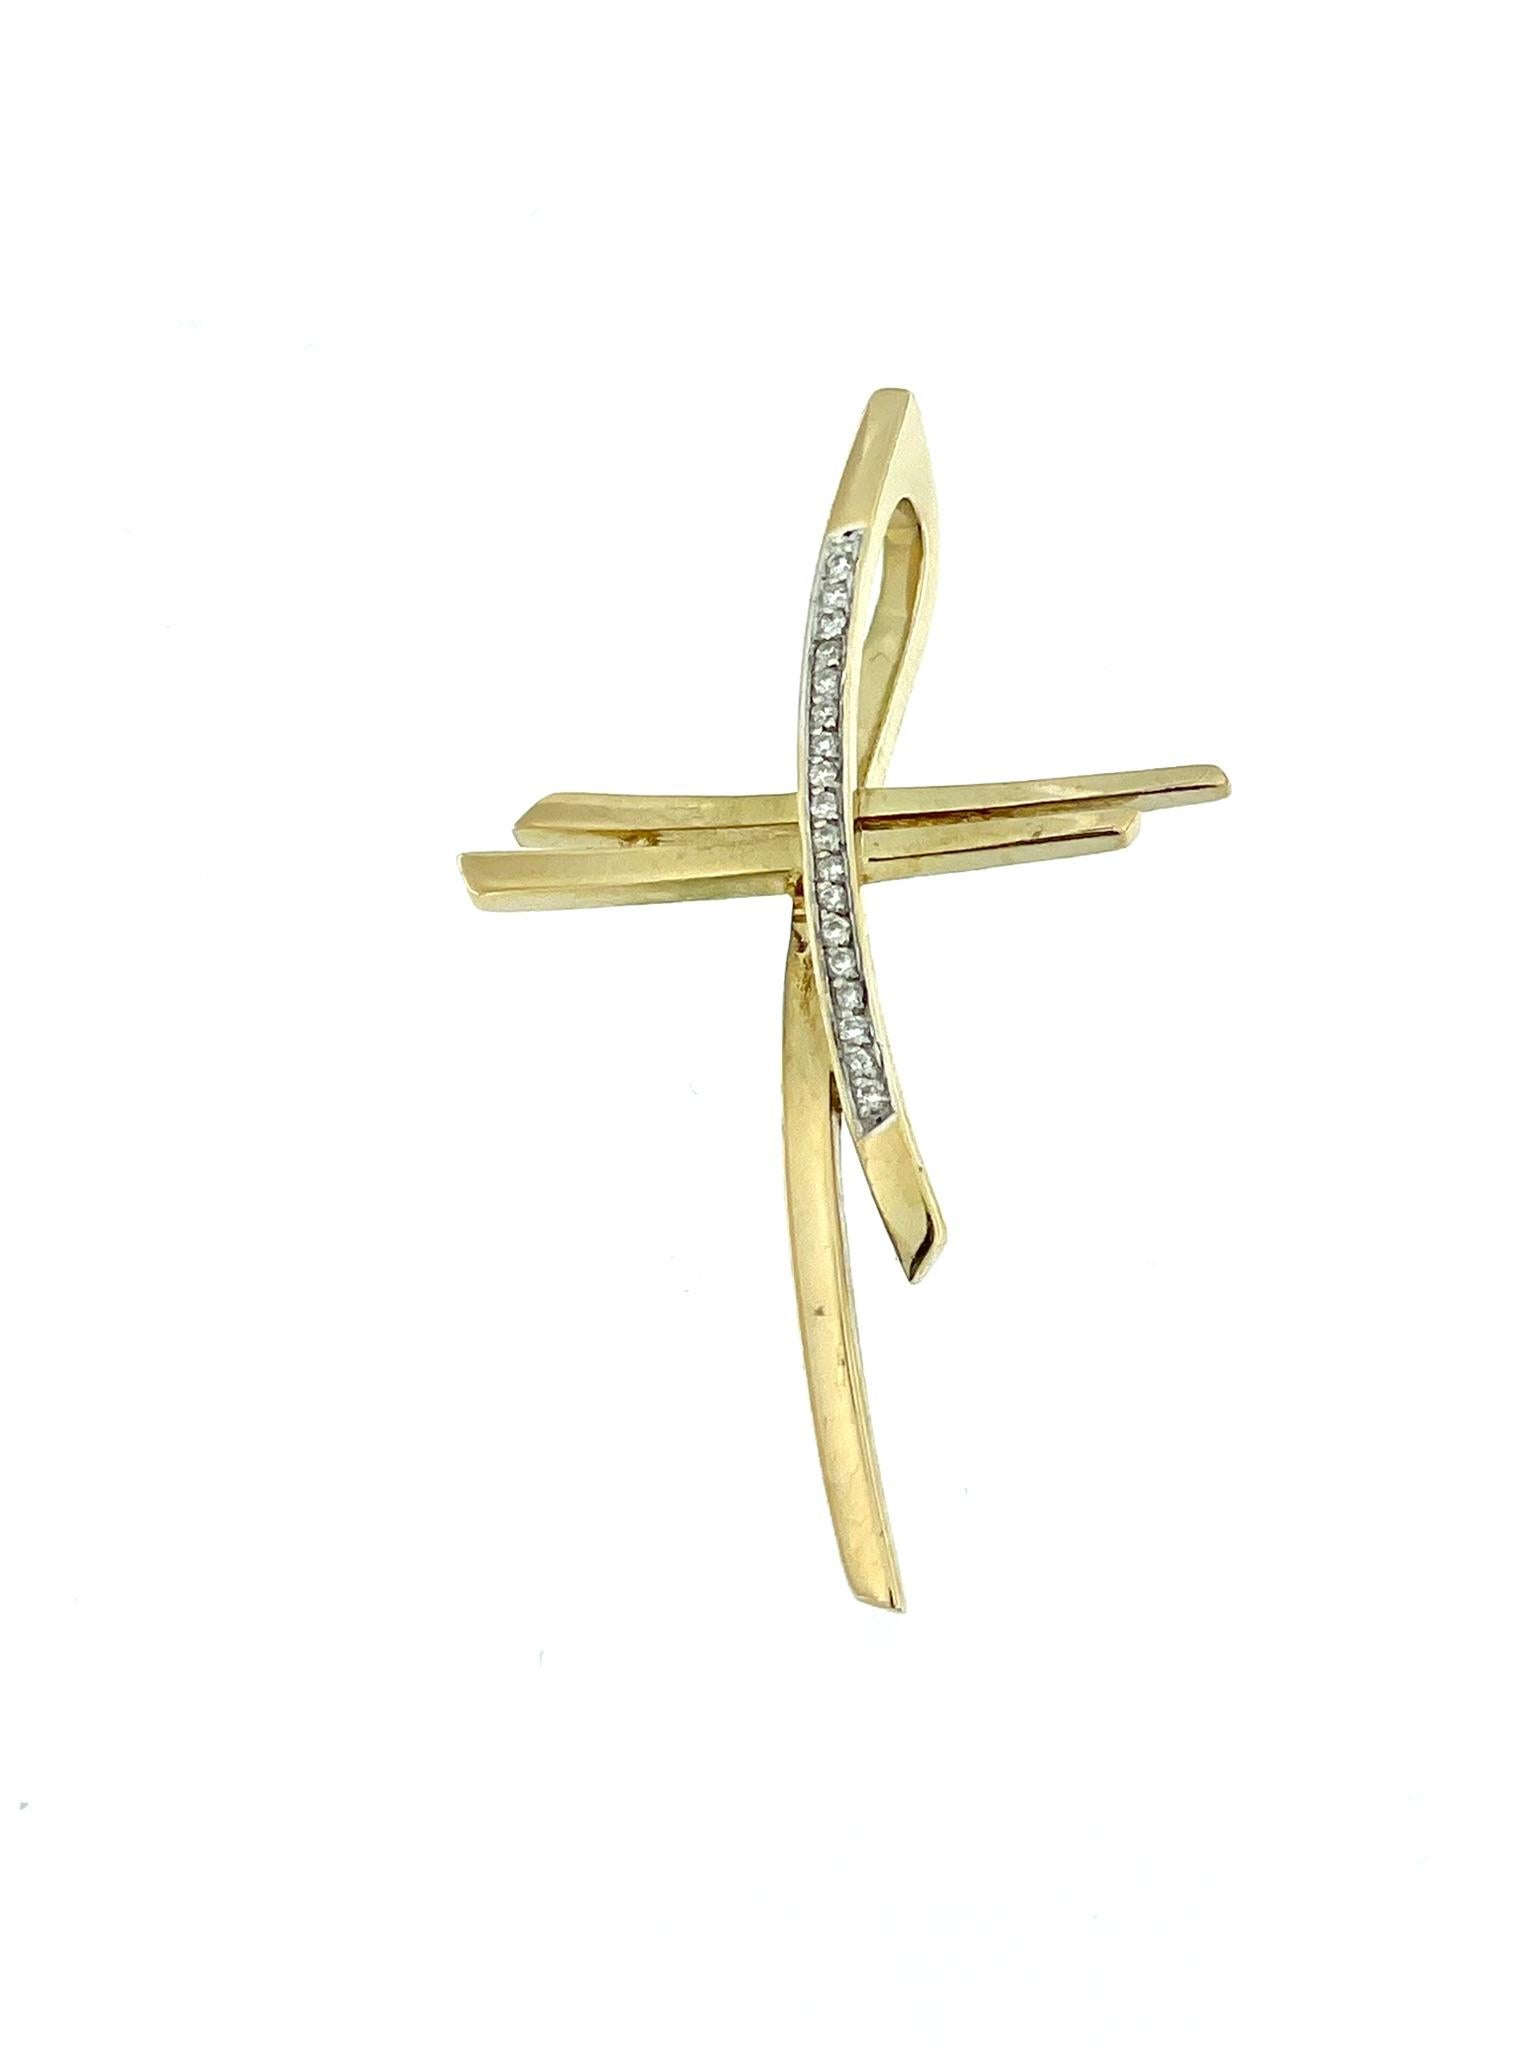 The Modern Yellow and White Gold Diamond Cross is an exquisite piece of jewelry crafted with precision and elegance. Made from 18kt gold, this cross combines the richness of yellow gold with the timeless appeal of white gold, creating a stunning